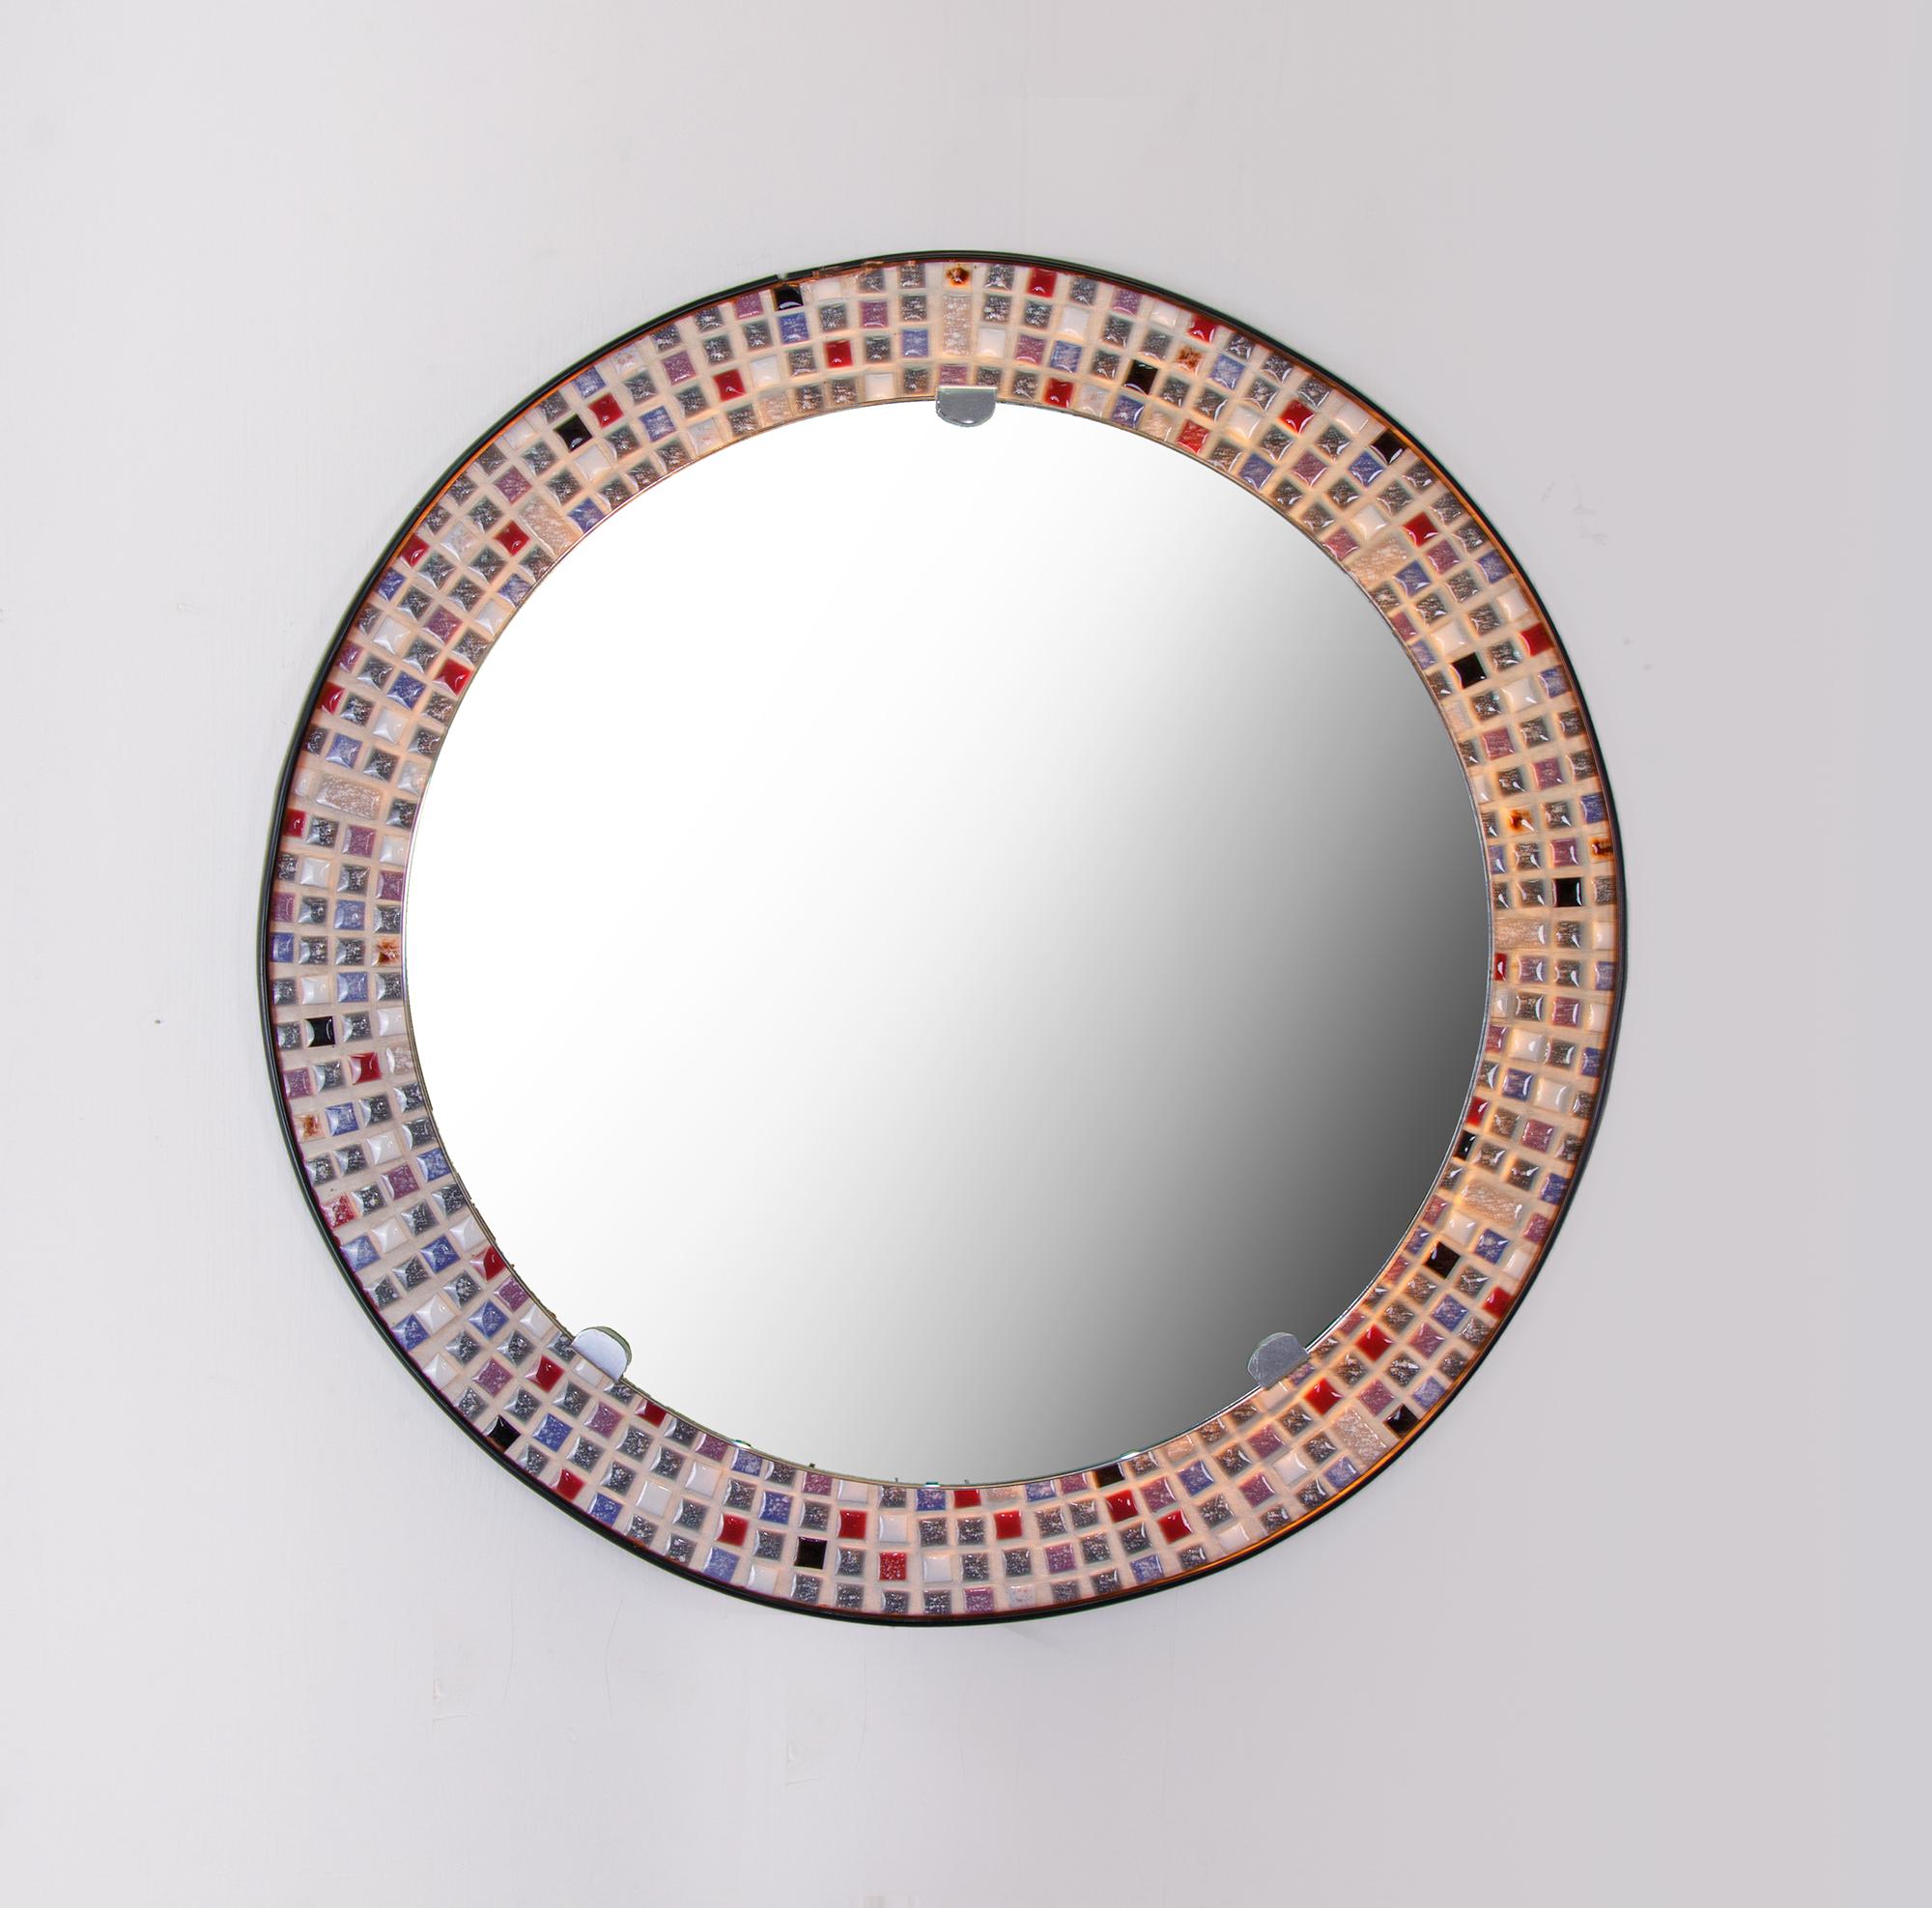 Circular Mosaic Backlit Mirror Glass and Perforated Metal, Germany 1950s In Good Condition For Sale In Niederdorfelden, Hessen